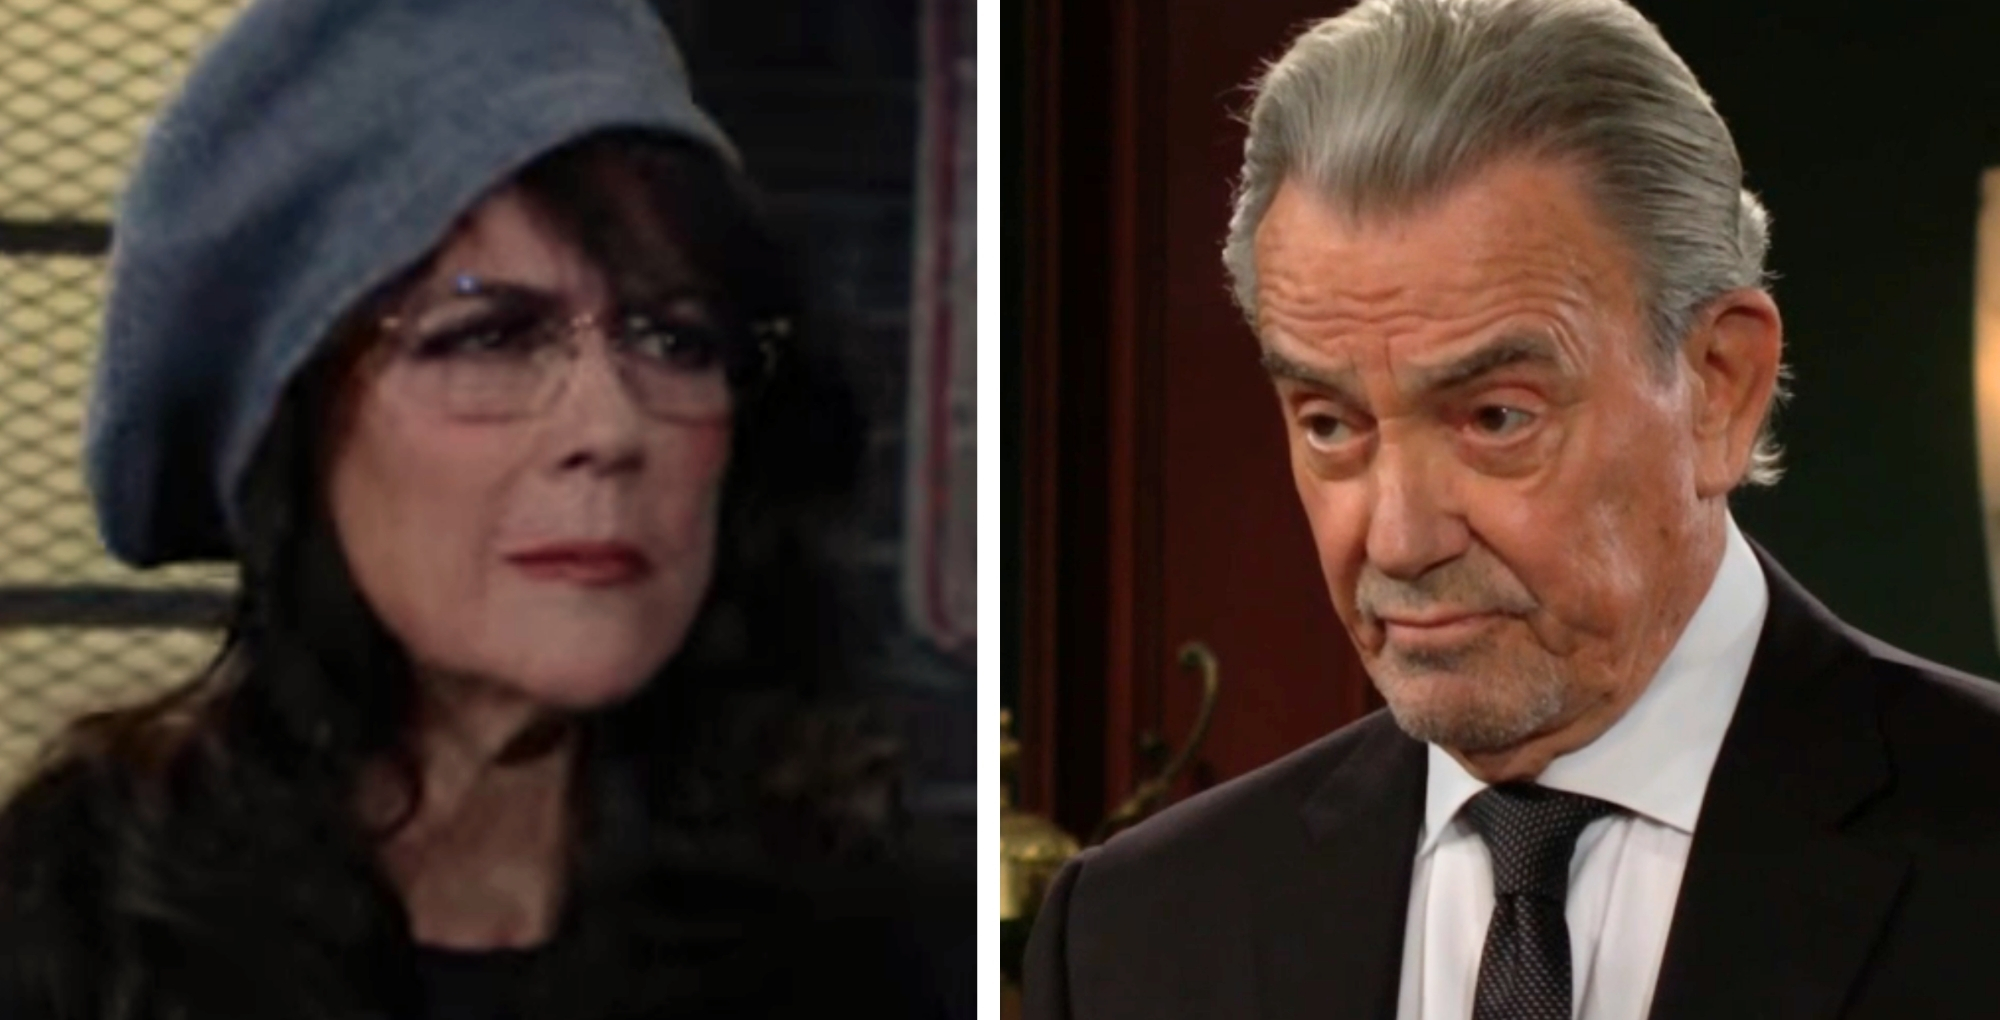 The Young and the Restless spoilers for Monday, March 11 see Victor and Jordan square off.